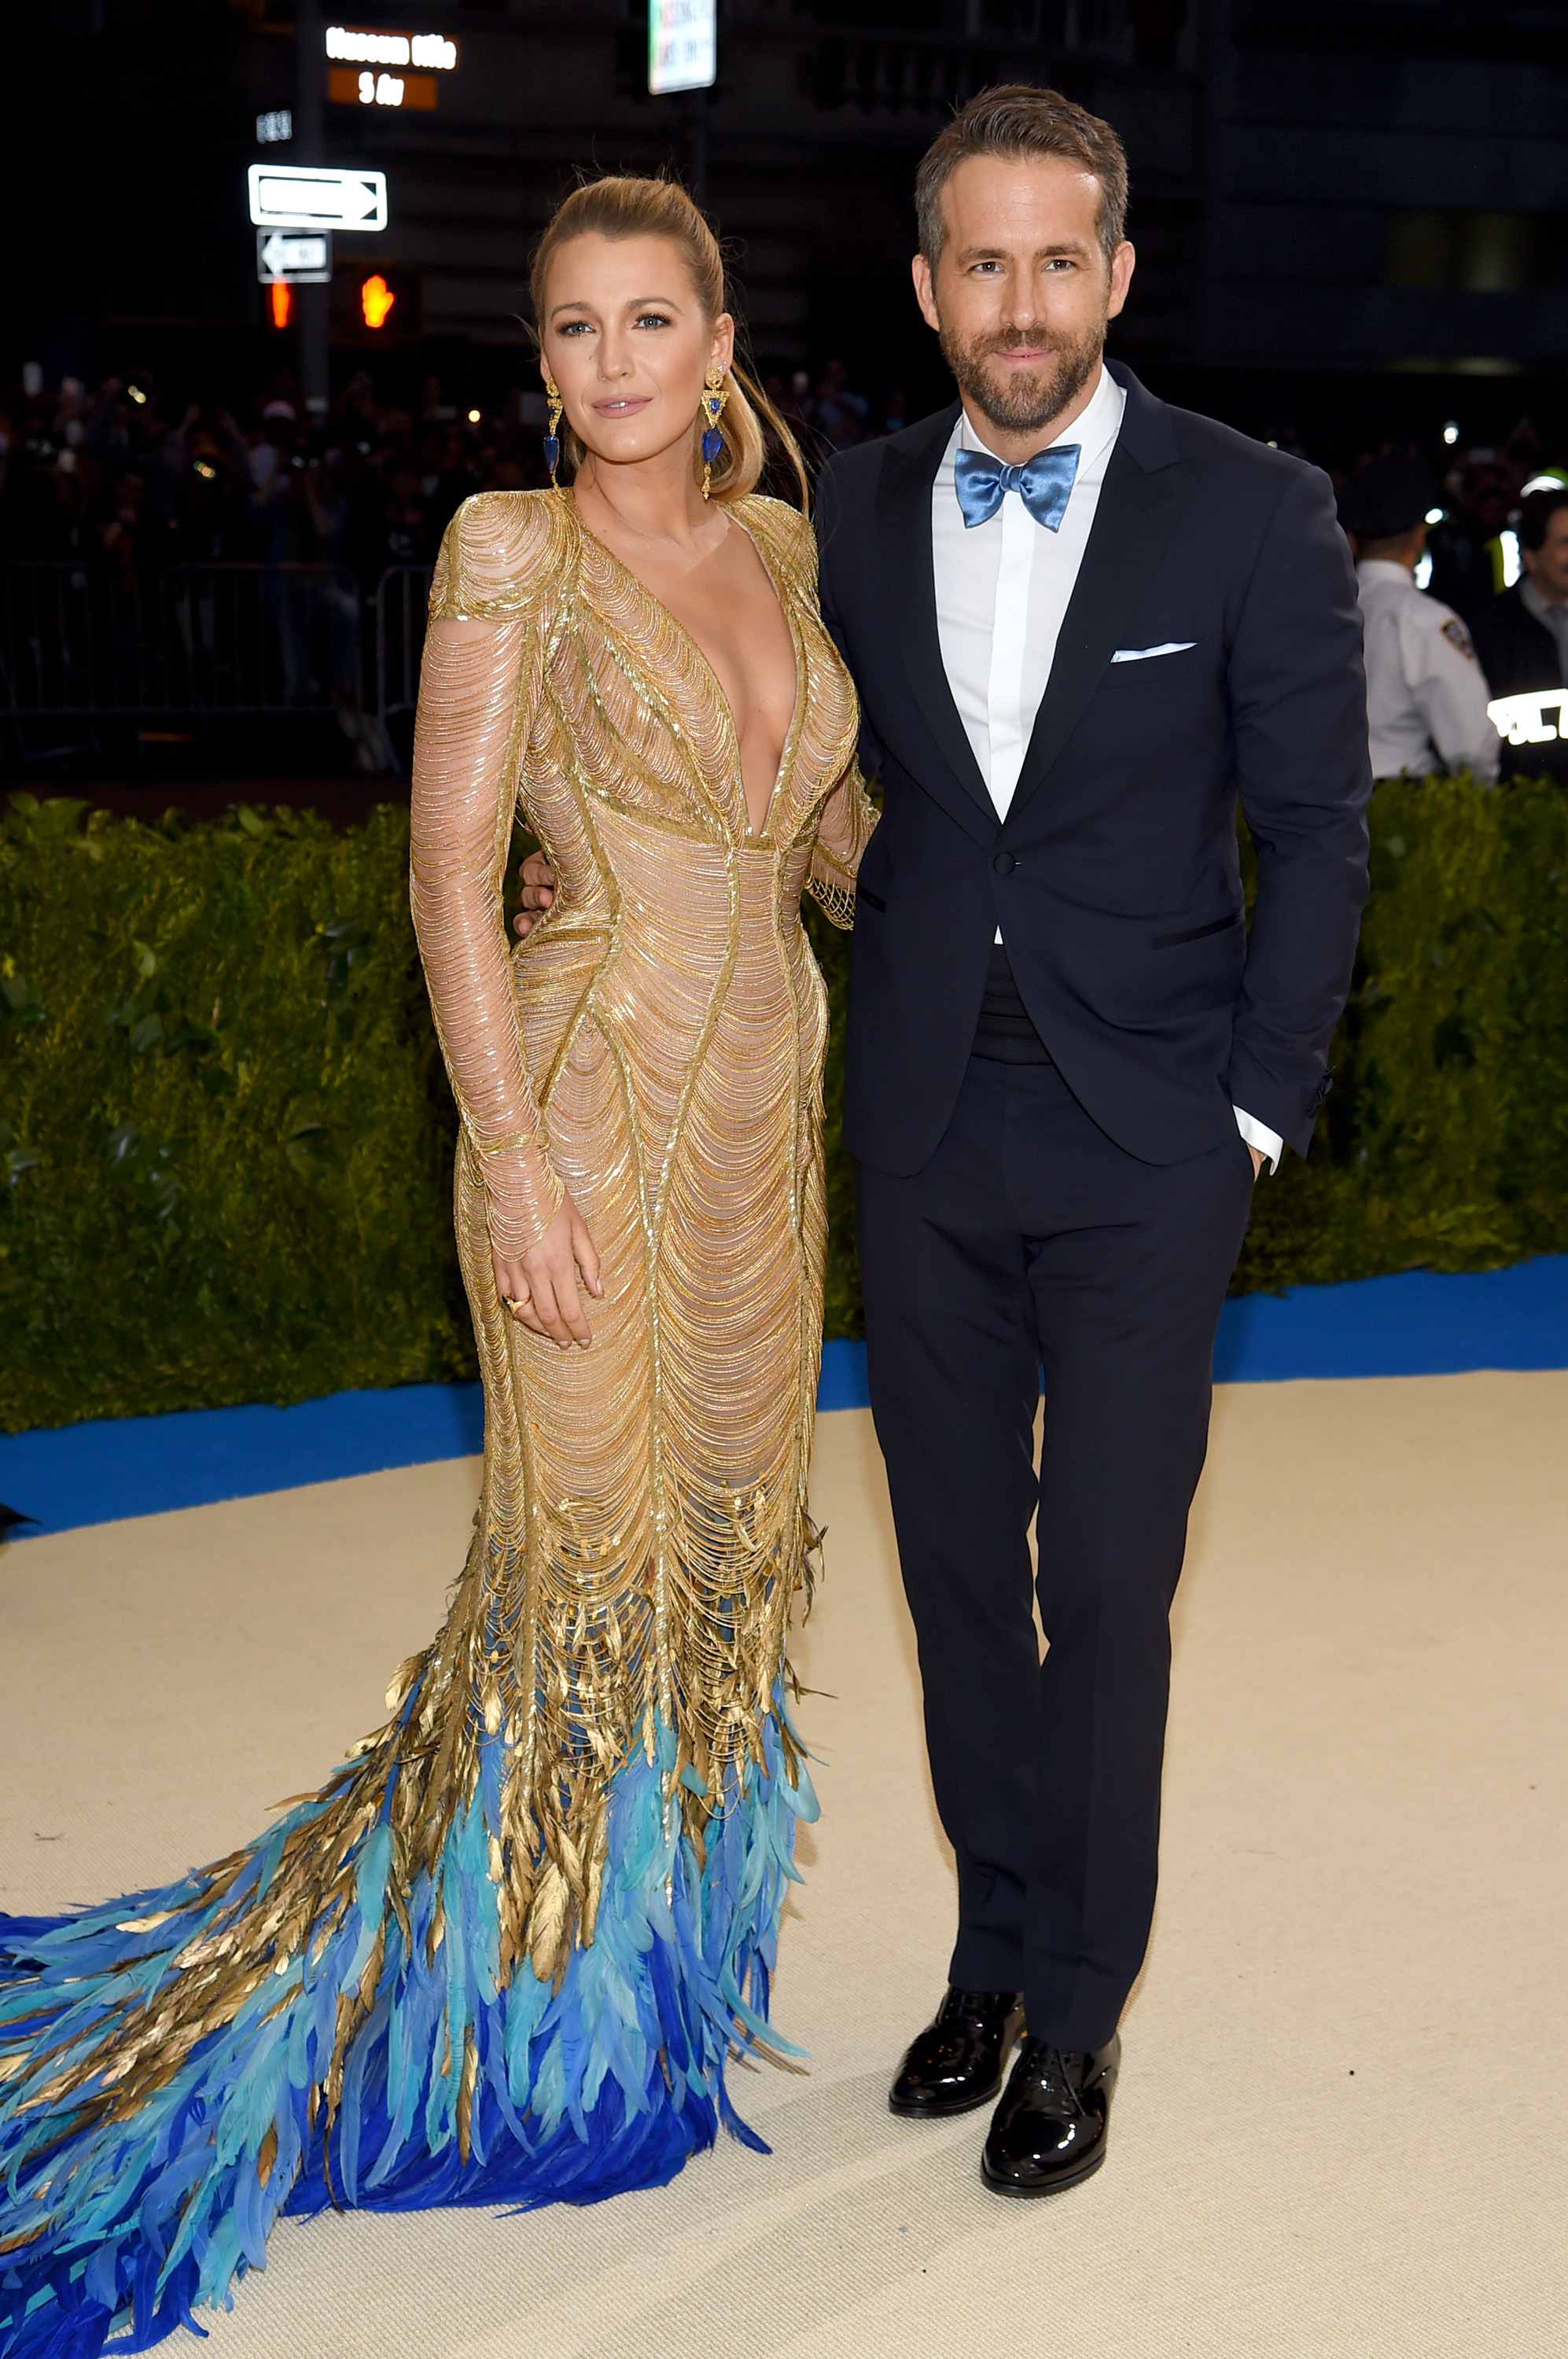 Blake Lively and Ryan Reynolds Do The Versace Thing - Go Fug Yourself